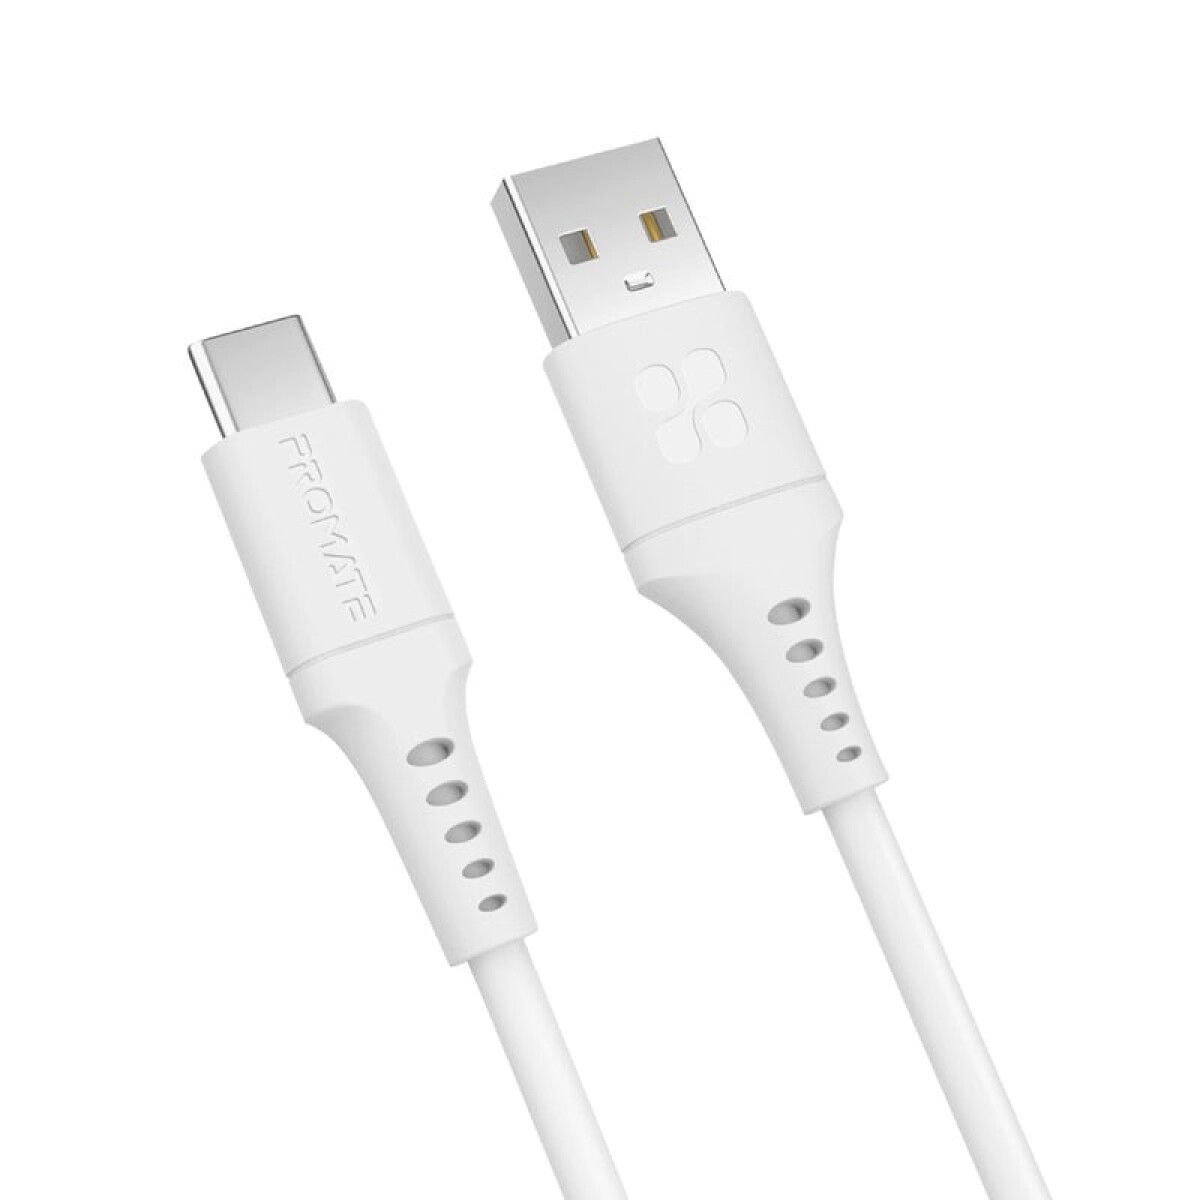 PROMATE POWERLINK-AC120.WHITE CABLE USB-A A USB-C 1.2M - Promate Powerlink-ac120.white Cable Usb-a A Usb-c 1.2m 